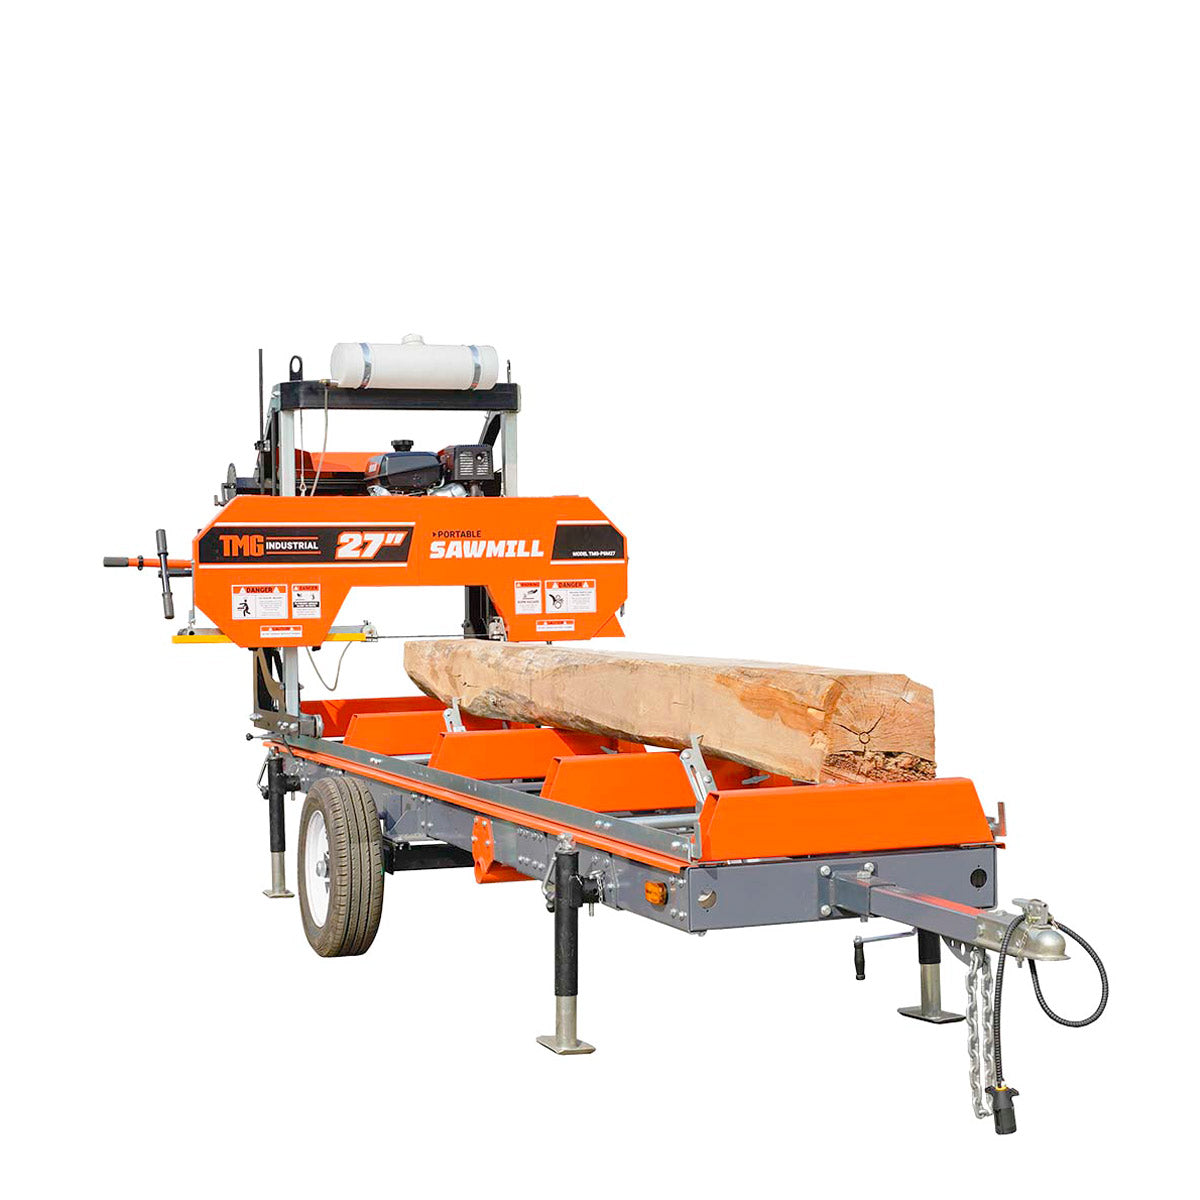 TMG Industrial Primary Sub-Frame for Sawmill Trailer PSM27, 4400-lb Capacity, Leveling Jacks, Anti-Tipping Rail Guard, TMG-PSM27-Sframe